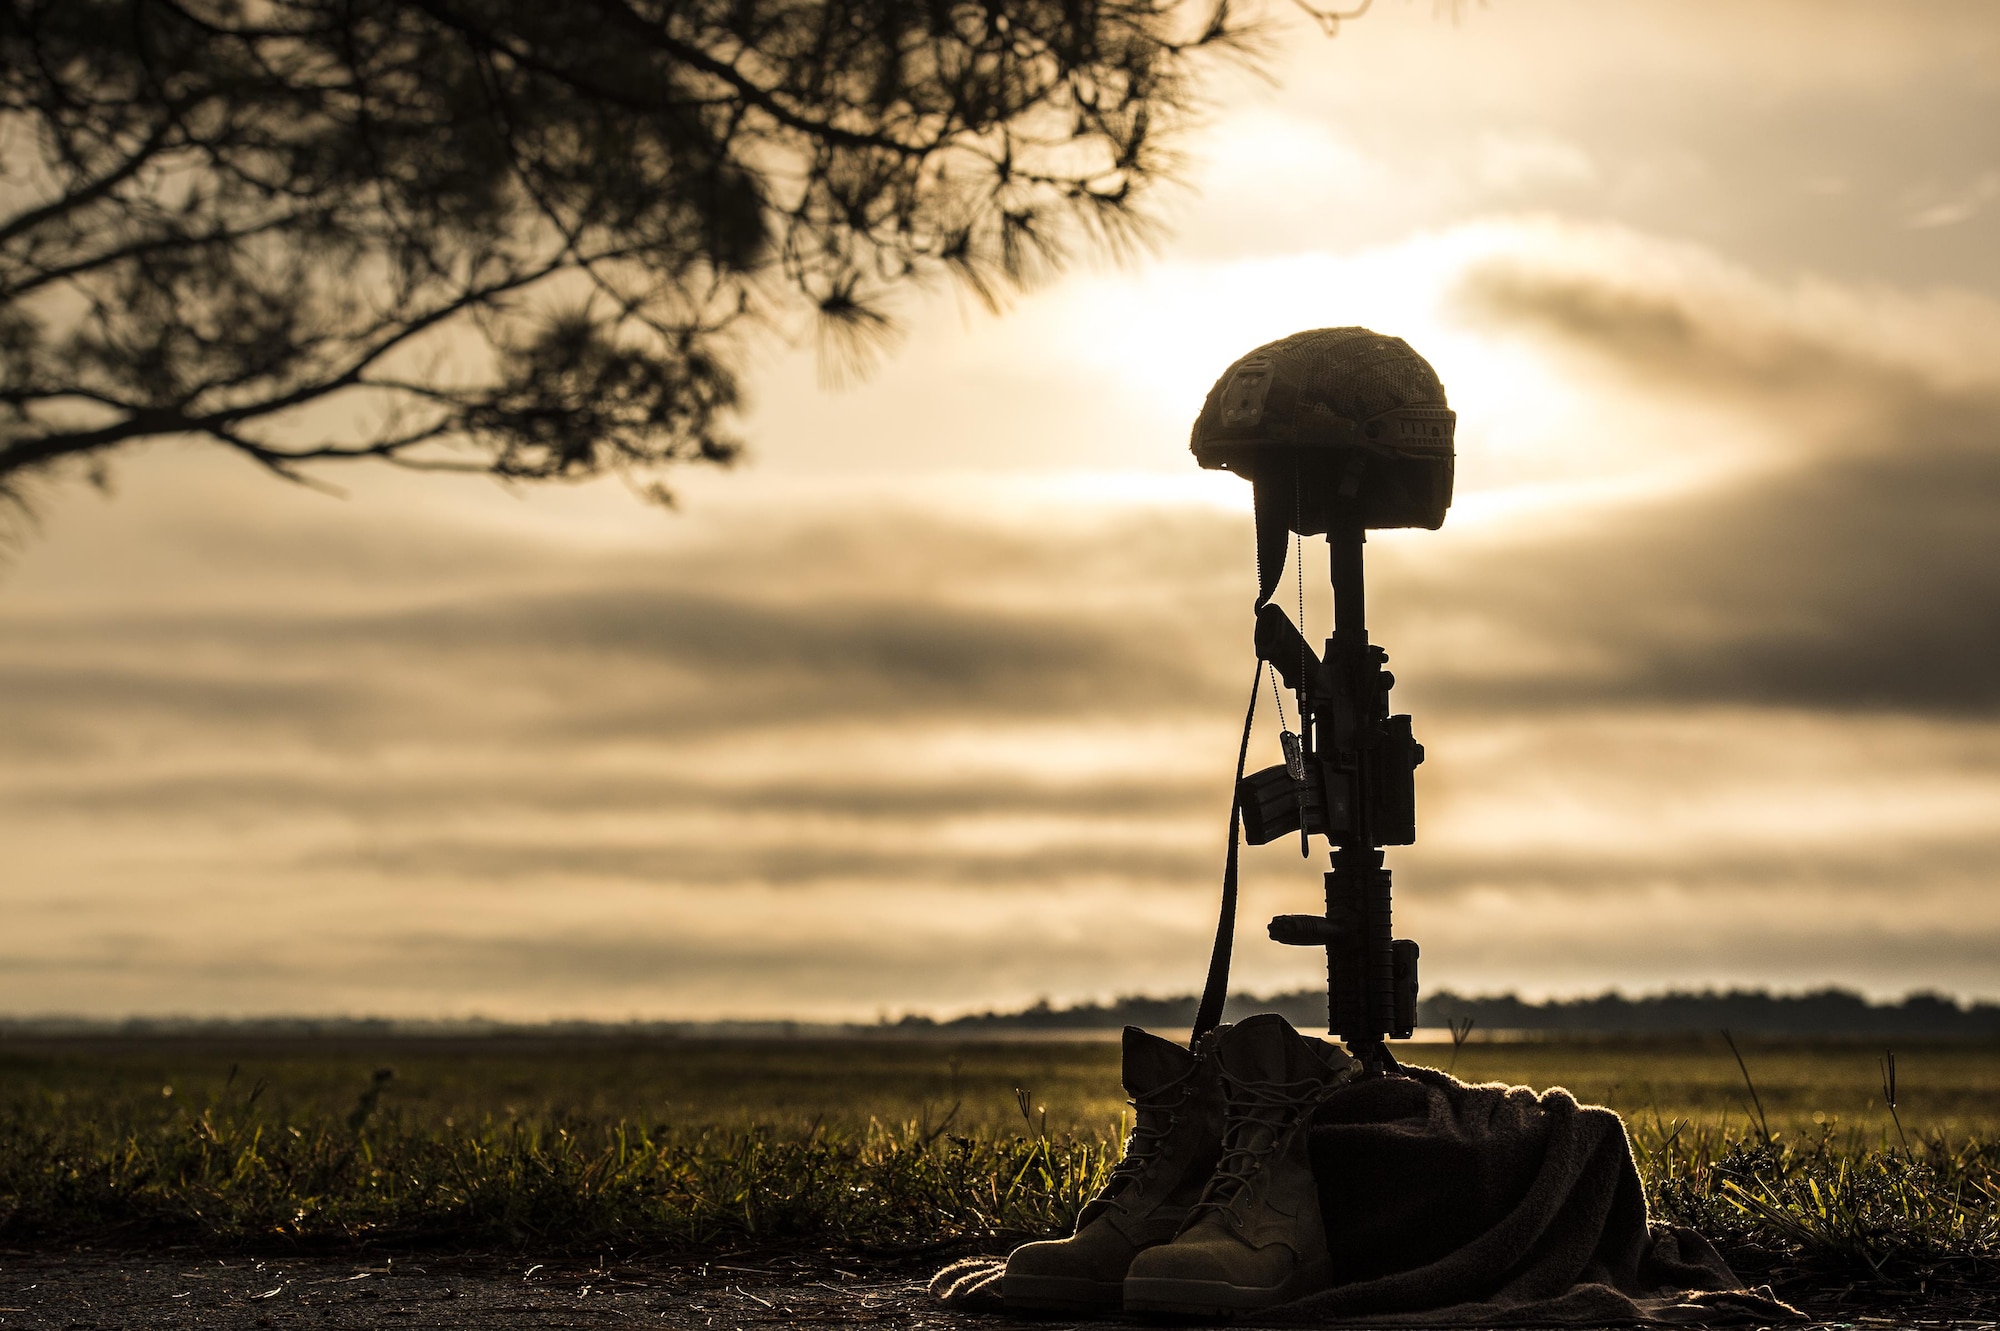 A battle cross sits on display during sunrise, April 15, 2016, at Avon Park Air Force Range, Fla. U.S. Air Force Airmen from the 93d Air Ground Operations Wing set up the cross for Lt. Col. William Schroeder, who was killed April 8. (U.S. Air Force Photo by Senior Airman Ryan Callaghan/Released)
